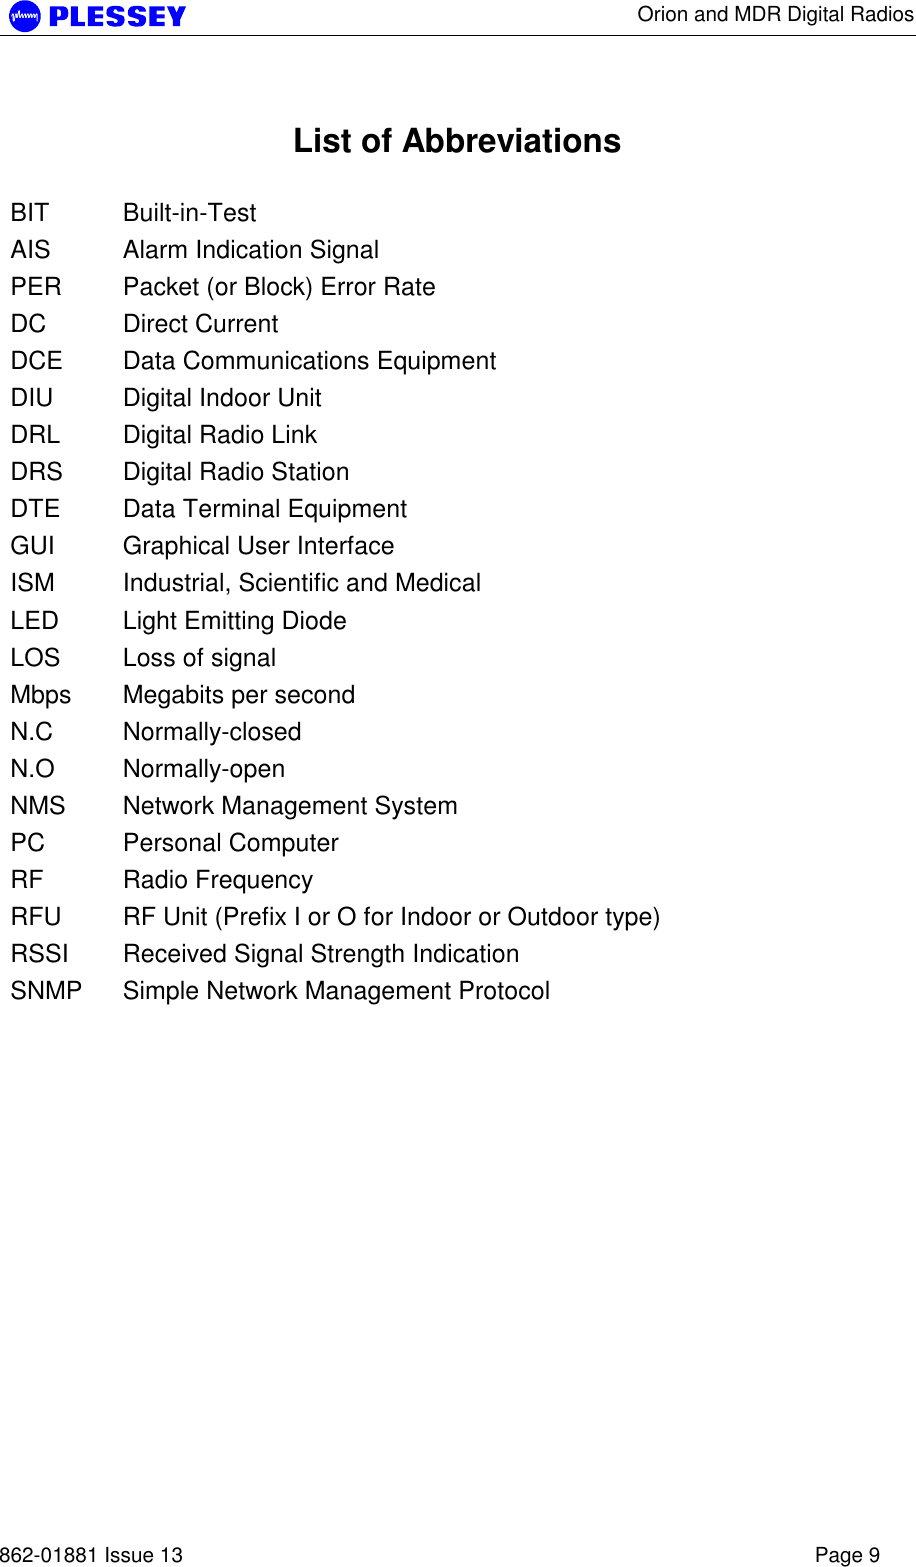      Orion and MDR Digital Radios   862-01881 Issue 13    Page 9  List of Abbreviations  BIT Built-in-Test AIS  Alarm Indication Signal PER  Packet (or Block) Error Rate DC Direct Current DCE  Data Communications Equipment DIU  Digital Indoor Unit DRL  Digital Radio Link DRS  Digital Radio Station DTE  Data Terminal Equipment GUI  Graphical User Interface ISM  Industrial, Scientific and Medical LED  Light Emitting Diode LOS  Loss of signal Mbps  Megabits per second N.C Normally-closed N.O Normally-open NMS  Network Management System PC Personal Computer RF Radio Frequency RFU  RF Unit (Prefix I or O for Indoor or Outdoor type) RSSI  Received Signal Strength Indication SNMP  Simple Network Management Protocol  